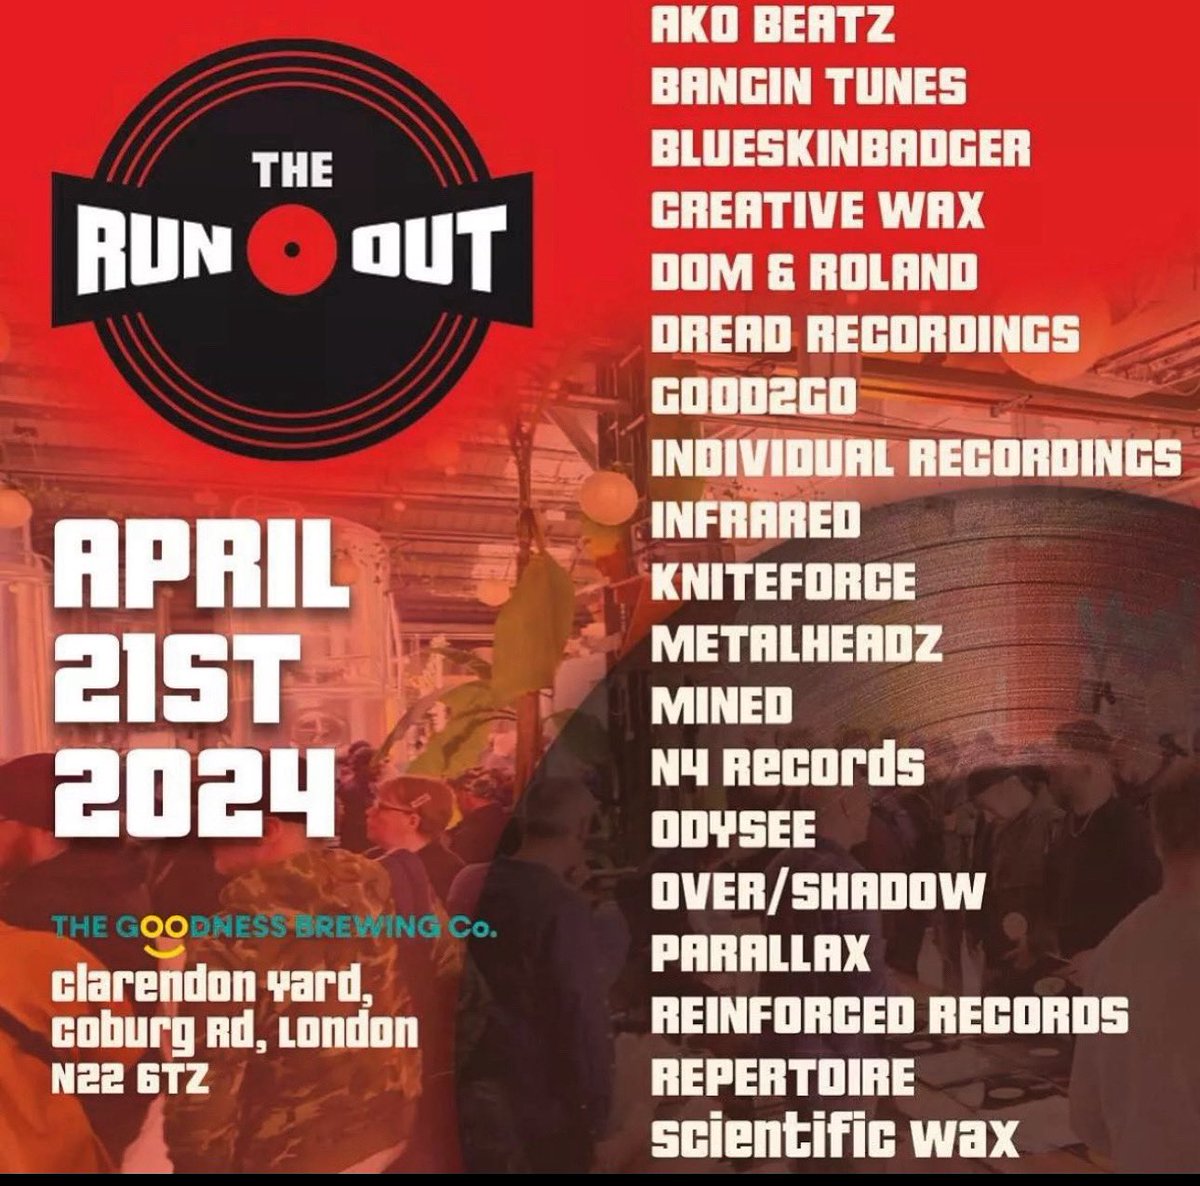 Don’t forget this sunday is @the_run_out @goodnessbrew a great day out of buying records and many DJs spinning some tunes. #therunout #goodnessbrew #vinyl #record #dnbvinyl #junglist #dnb #drumandbass #justdovinyl #vinyl4life #breakbeat #newskool #london